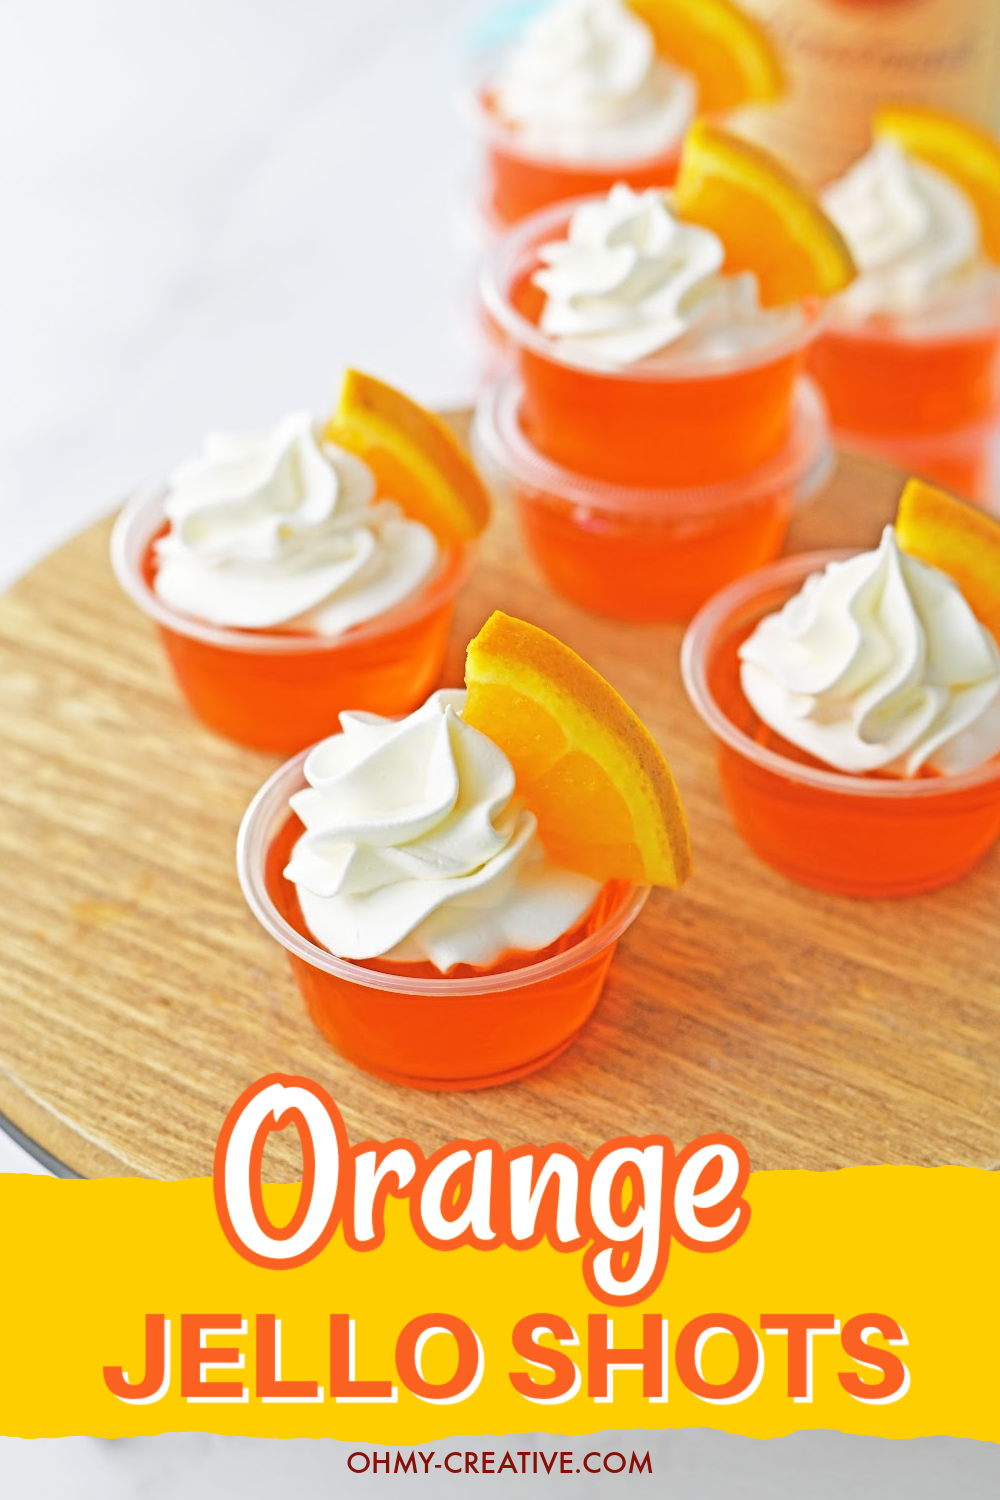 Easy Orange Jello Shots With Whipped Cream Topping